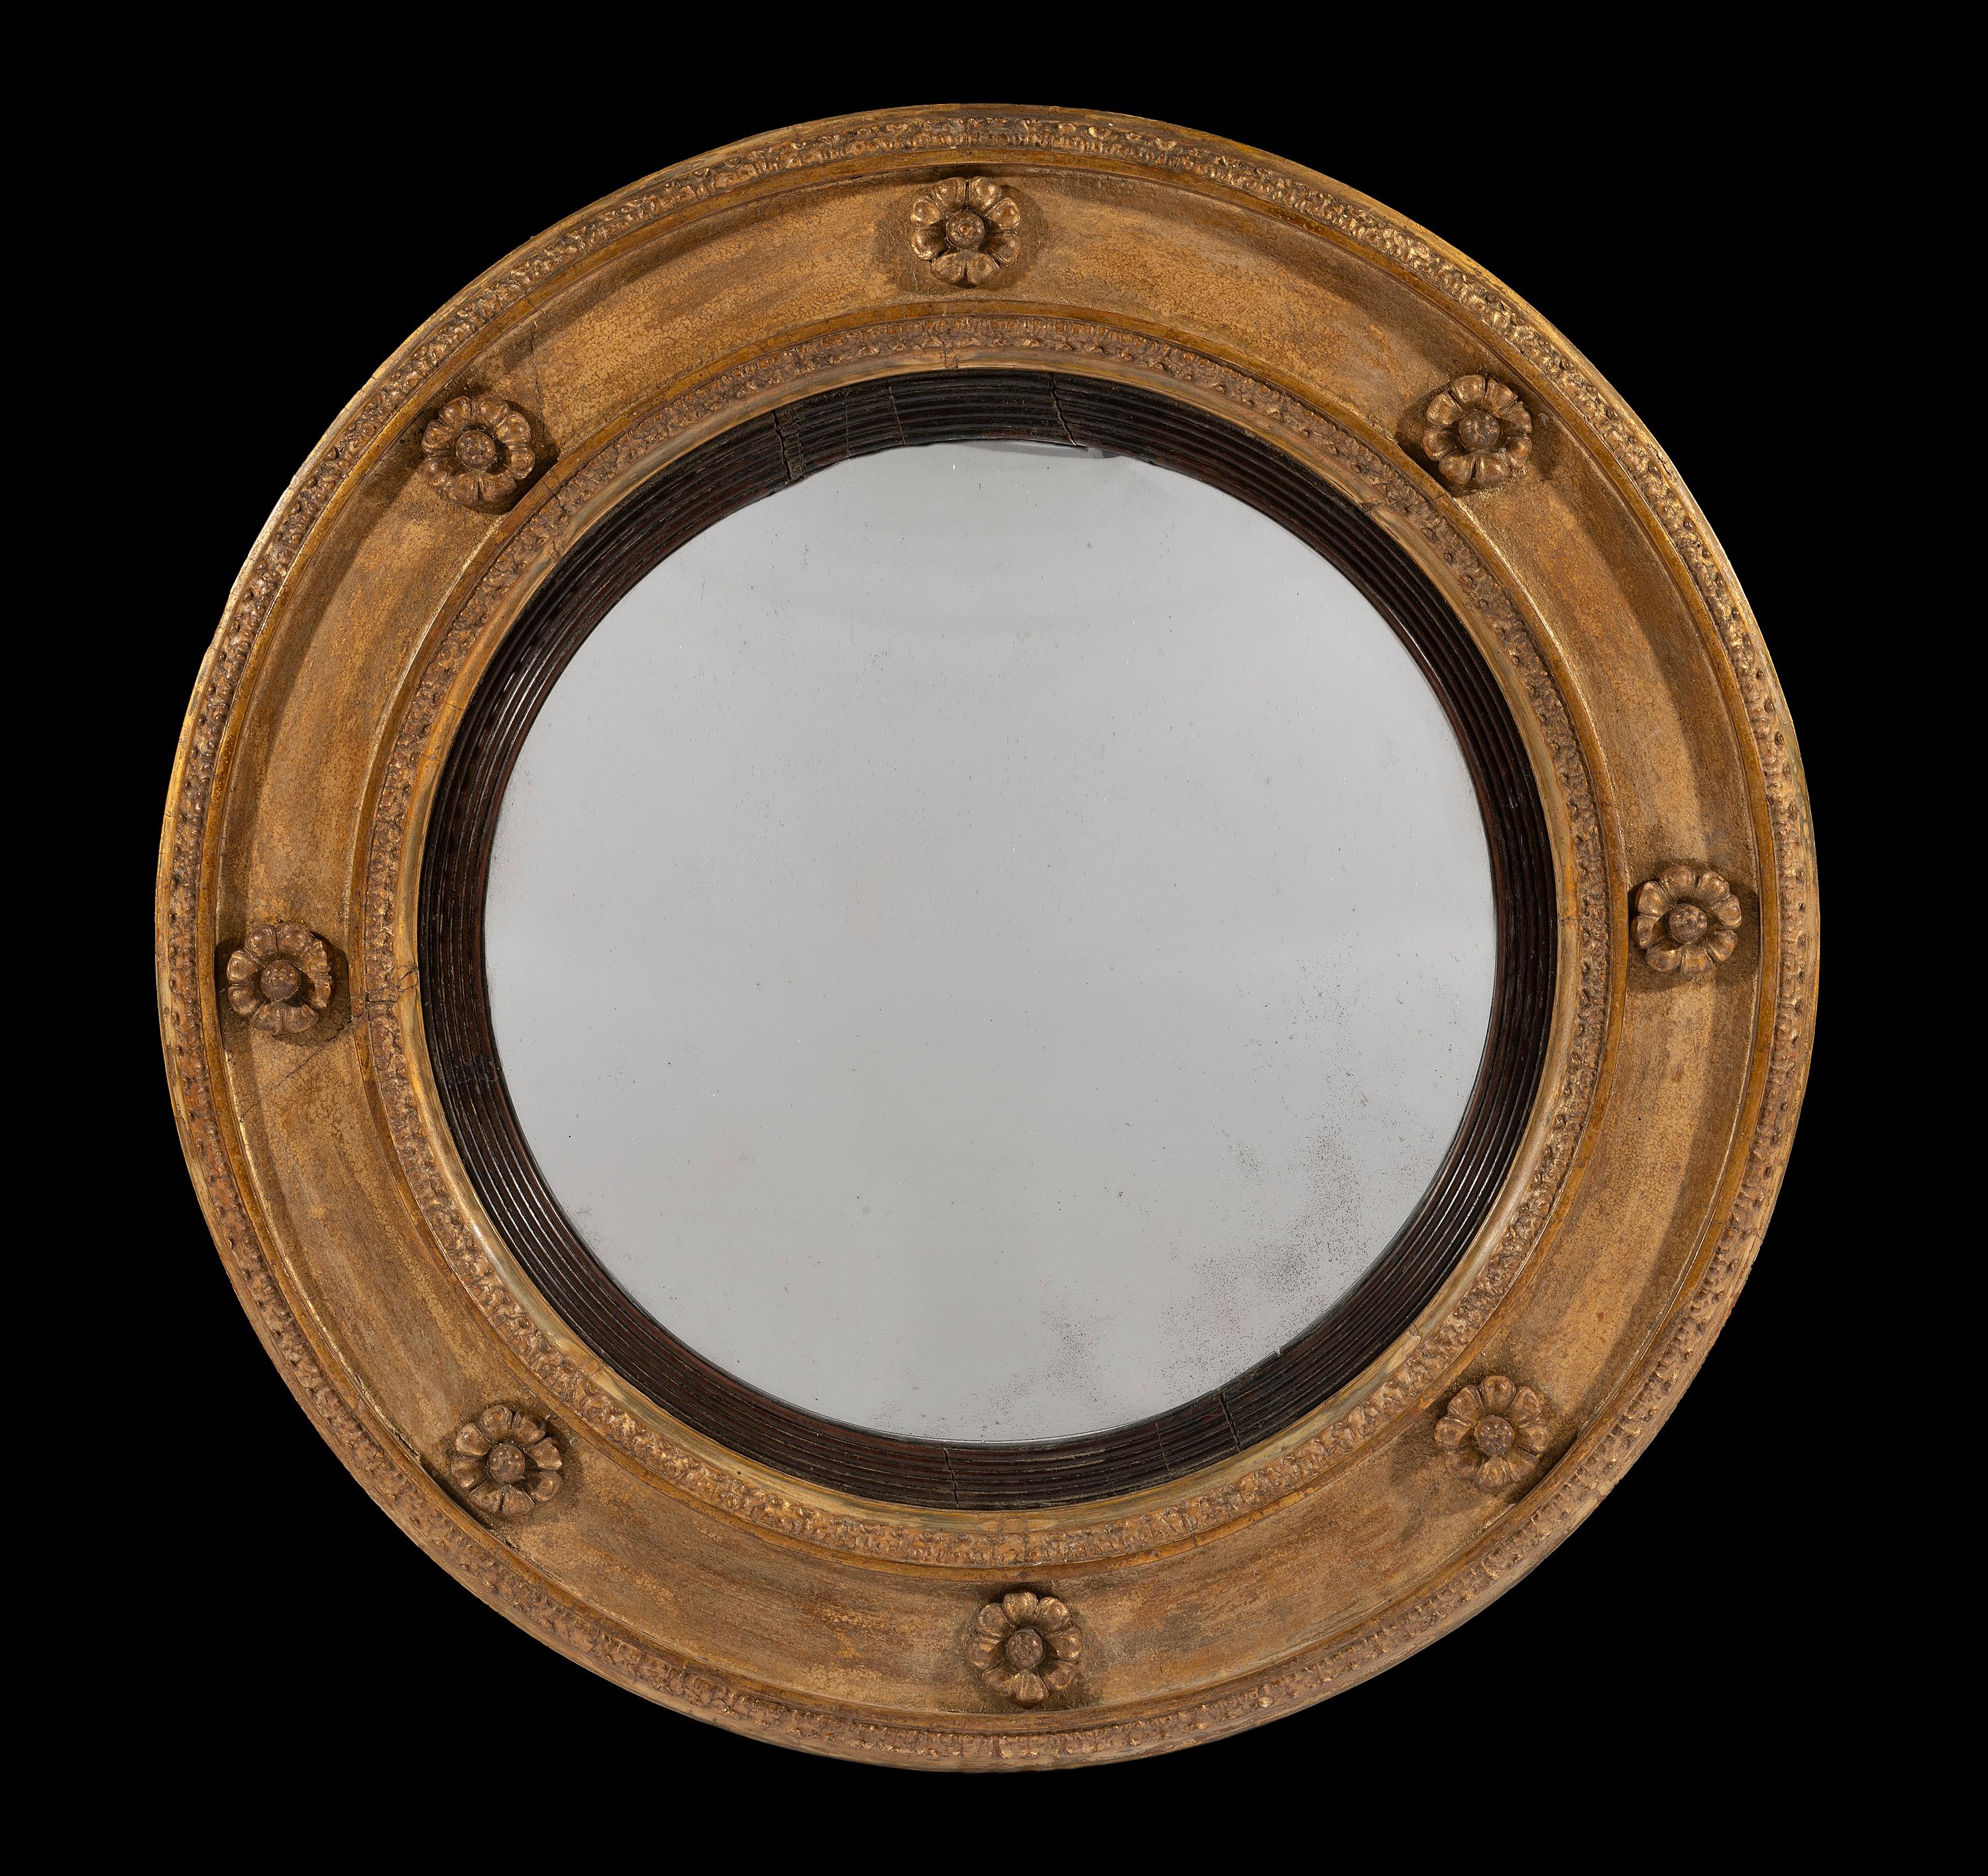 The original glass plate has a shallow convex surmounted on an ebonies reeded slip and sits in a circular giltwood frame. The rosettes are crisply carved and the overall style of the mirror is more late Georgian than the 'Regency' convex frames that